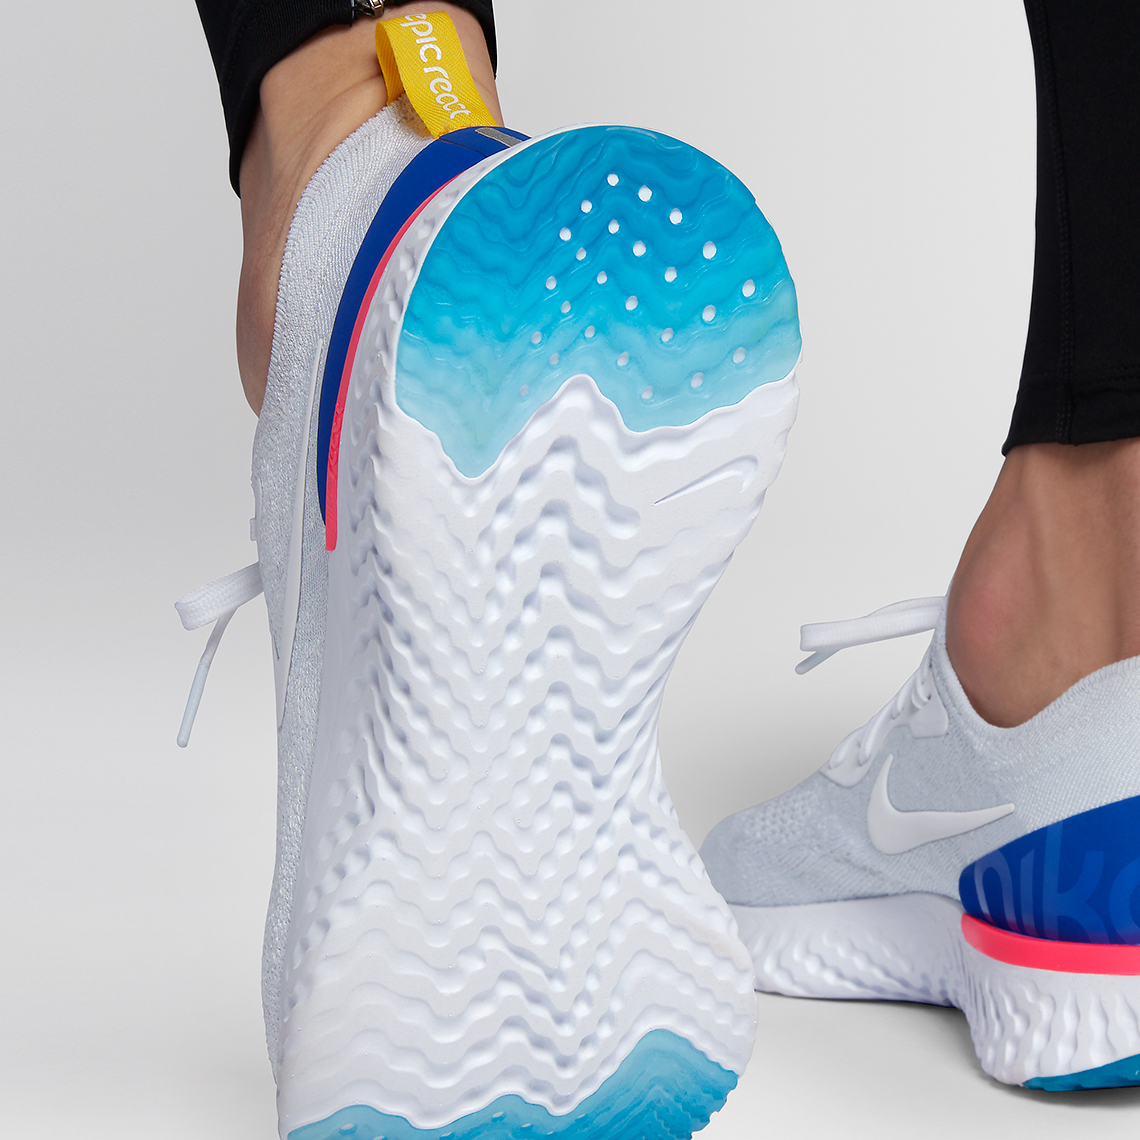 nike-epic-react-release-info-official-images-6.jpg